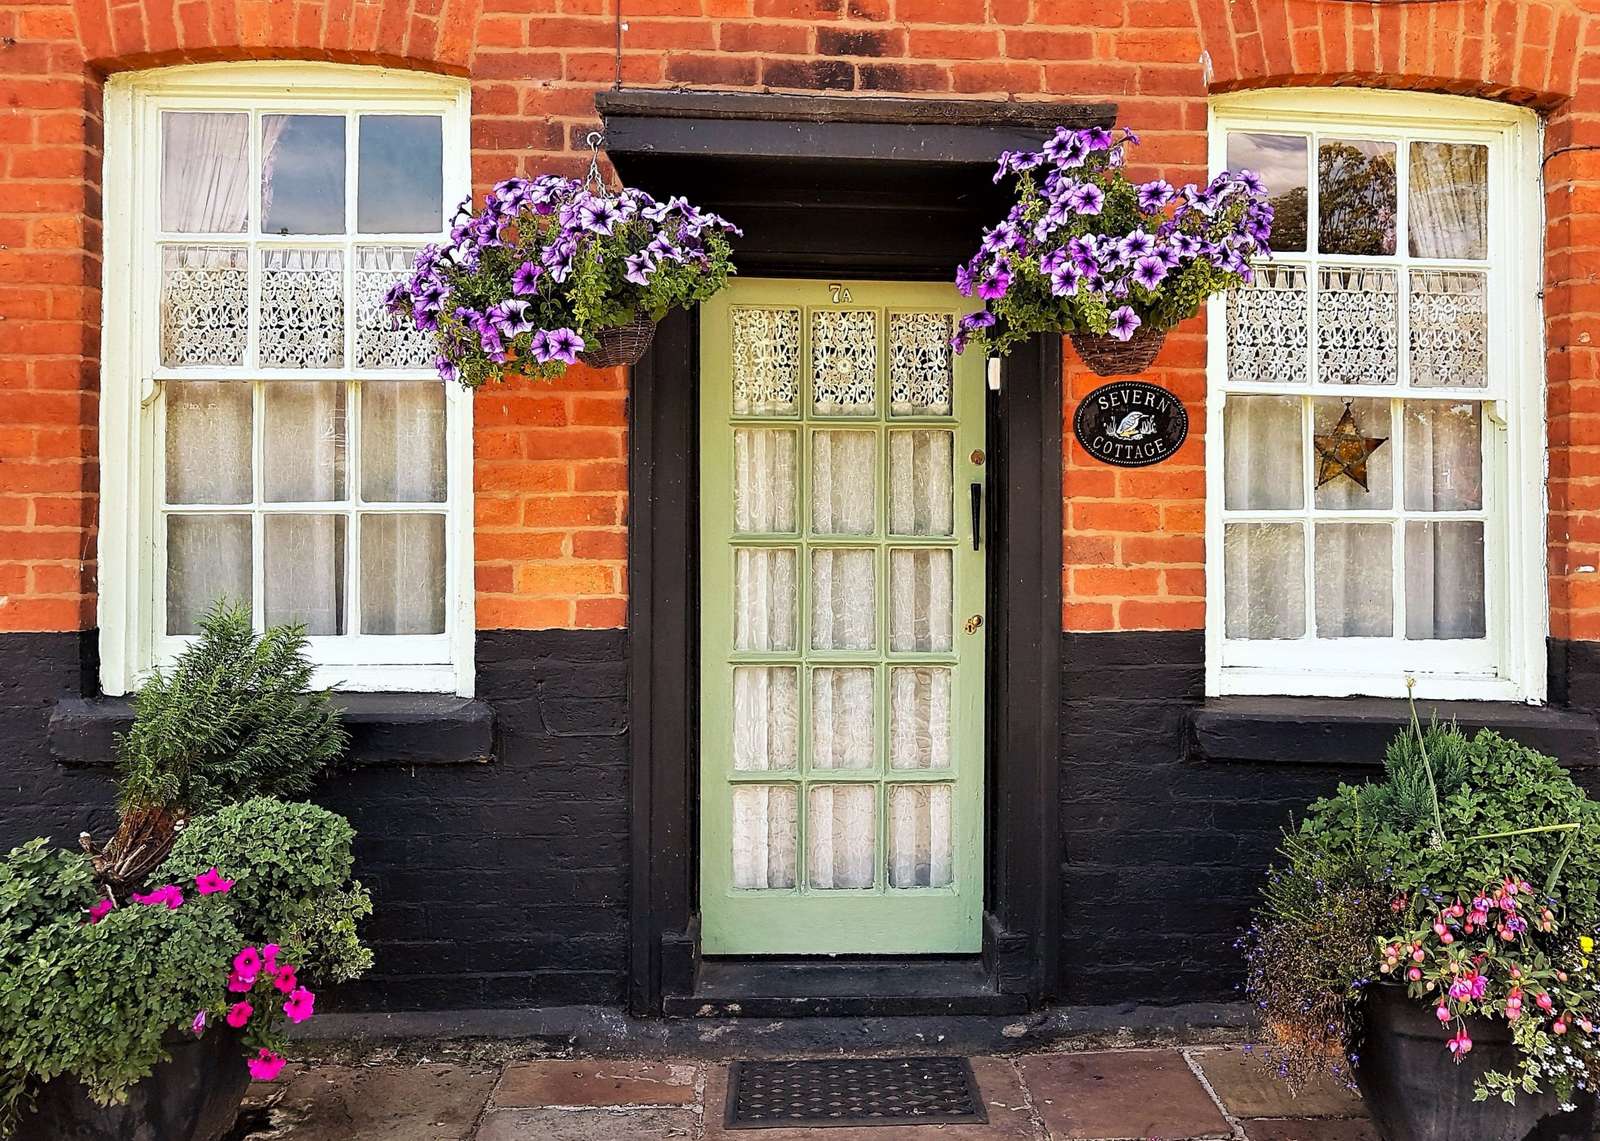 Entrance decorated with petunias online puzzle